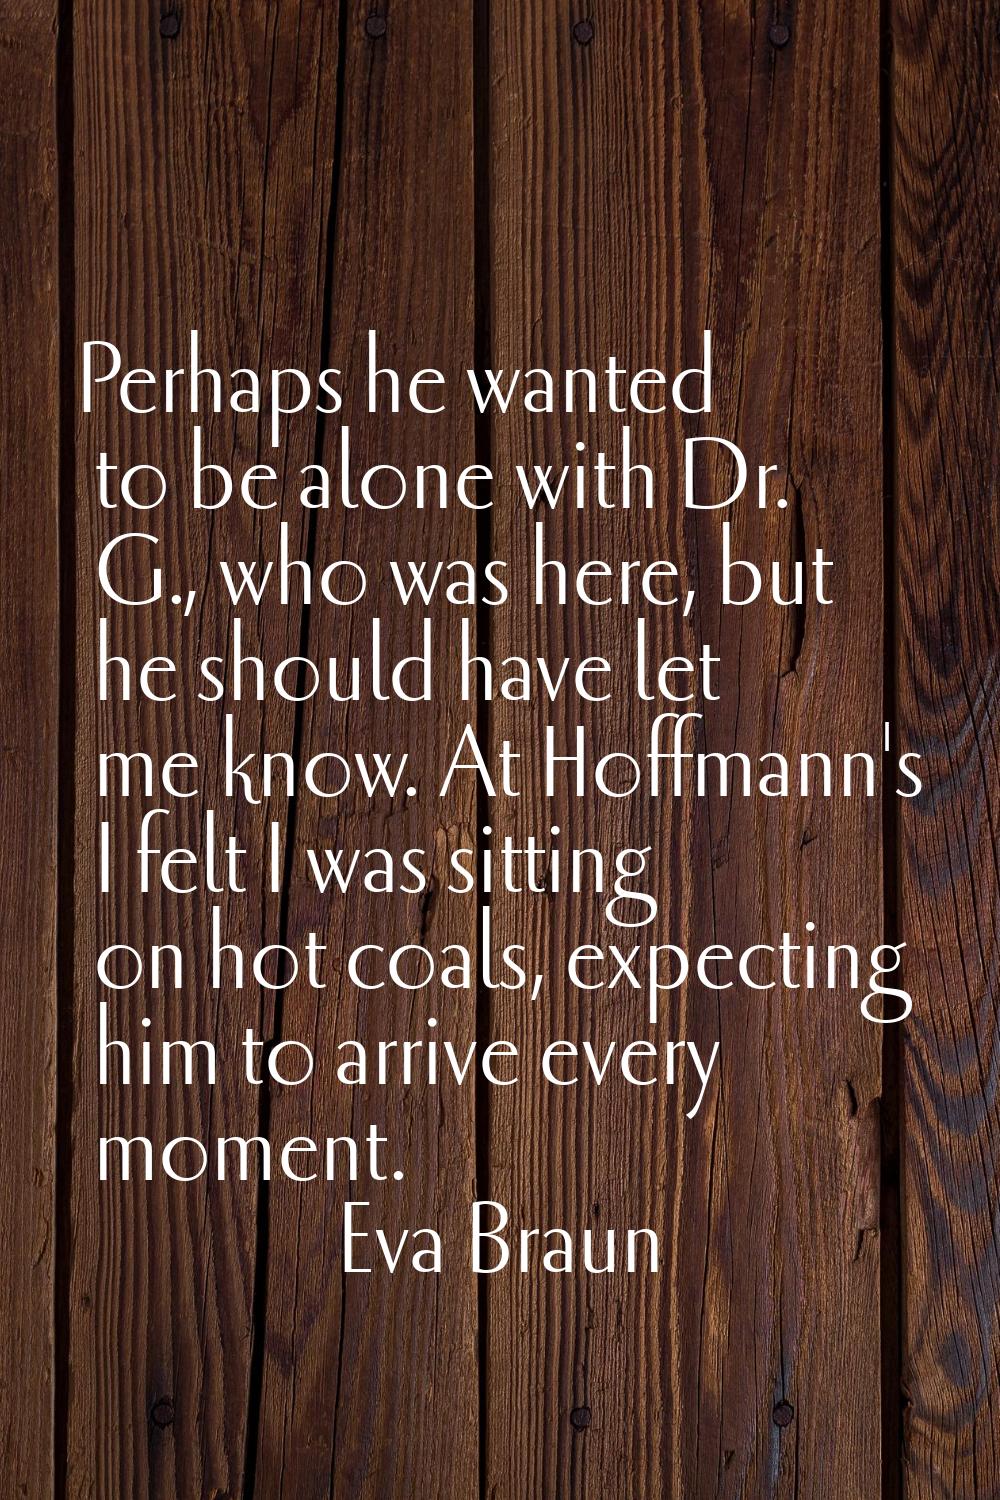 Perhaps he wanted to be alone with Dr. G., who was here, but he should have let me know. At Hoffman